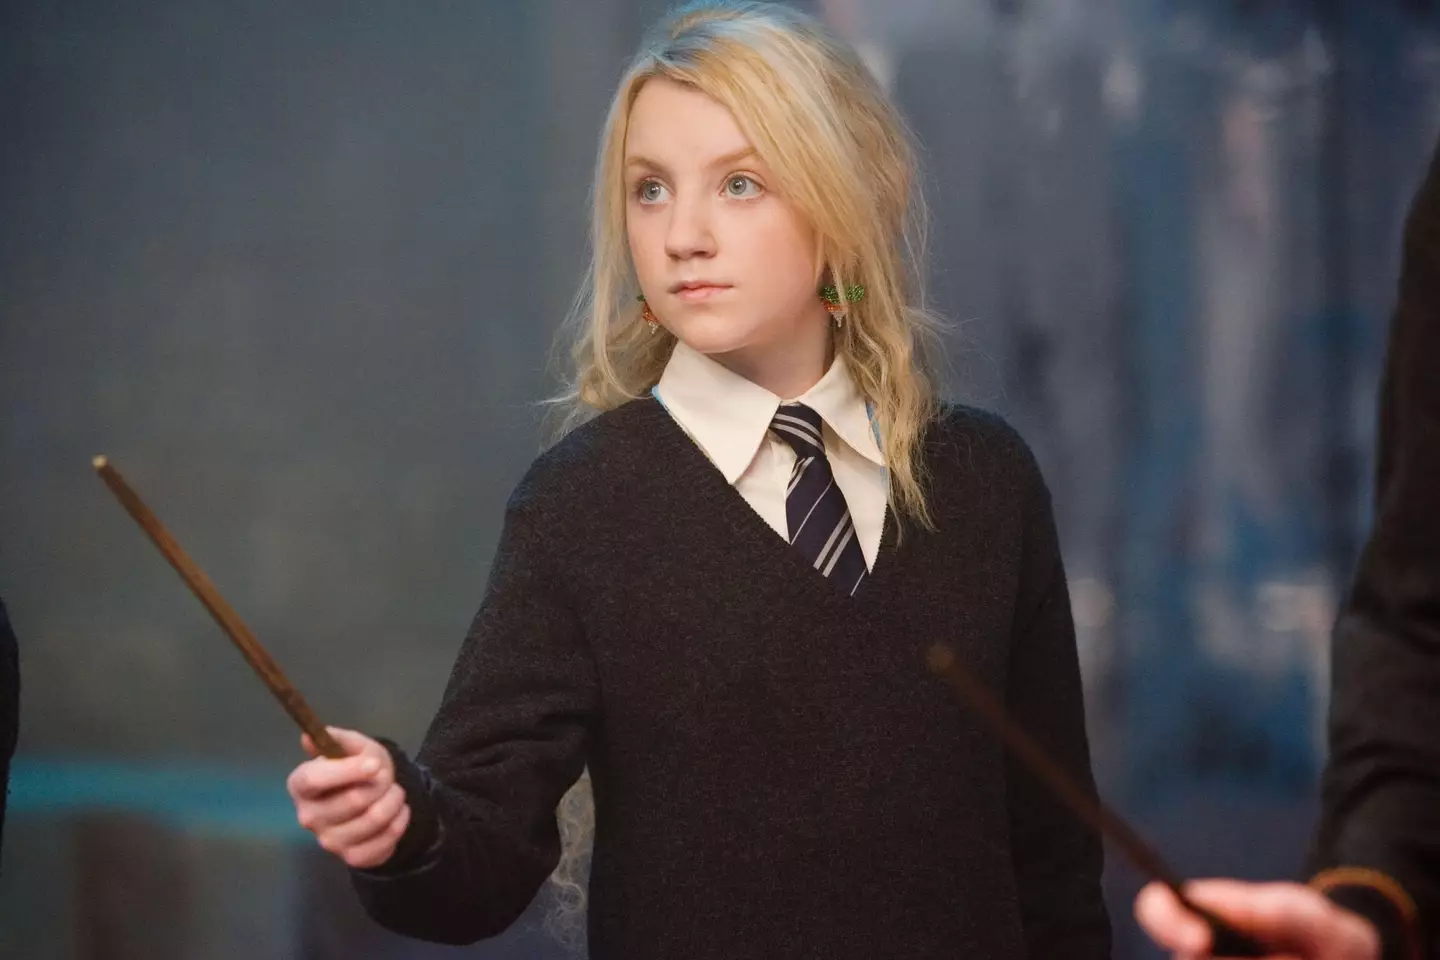 The actress played Luna Lovegood in the beloved film franchise.